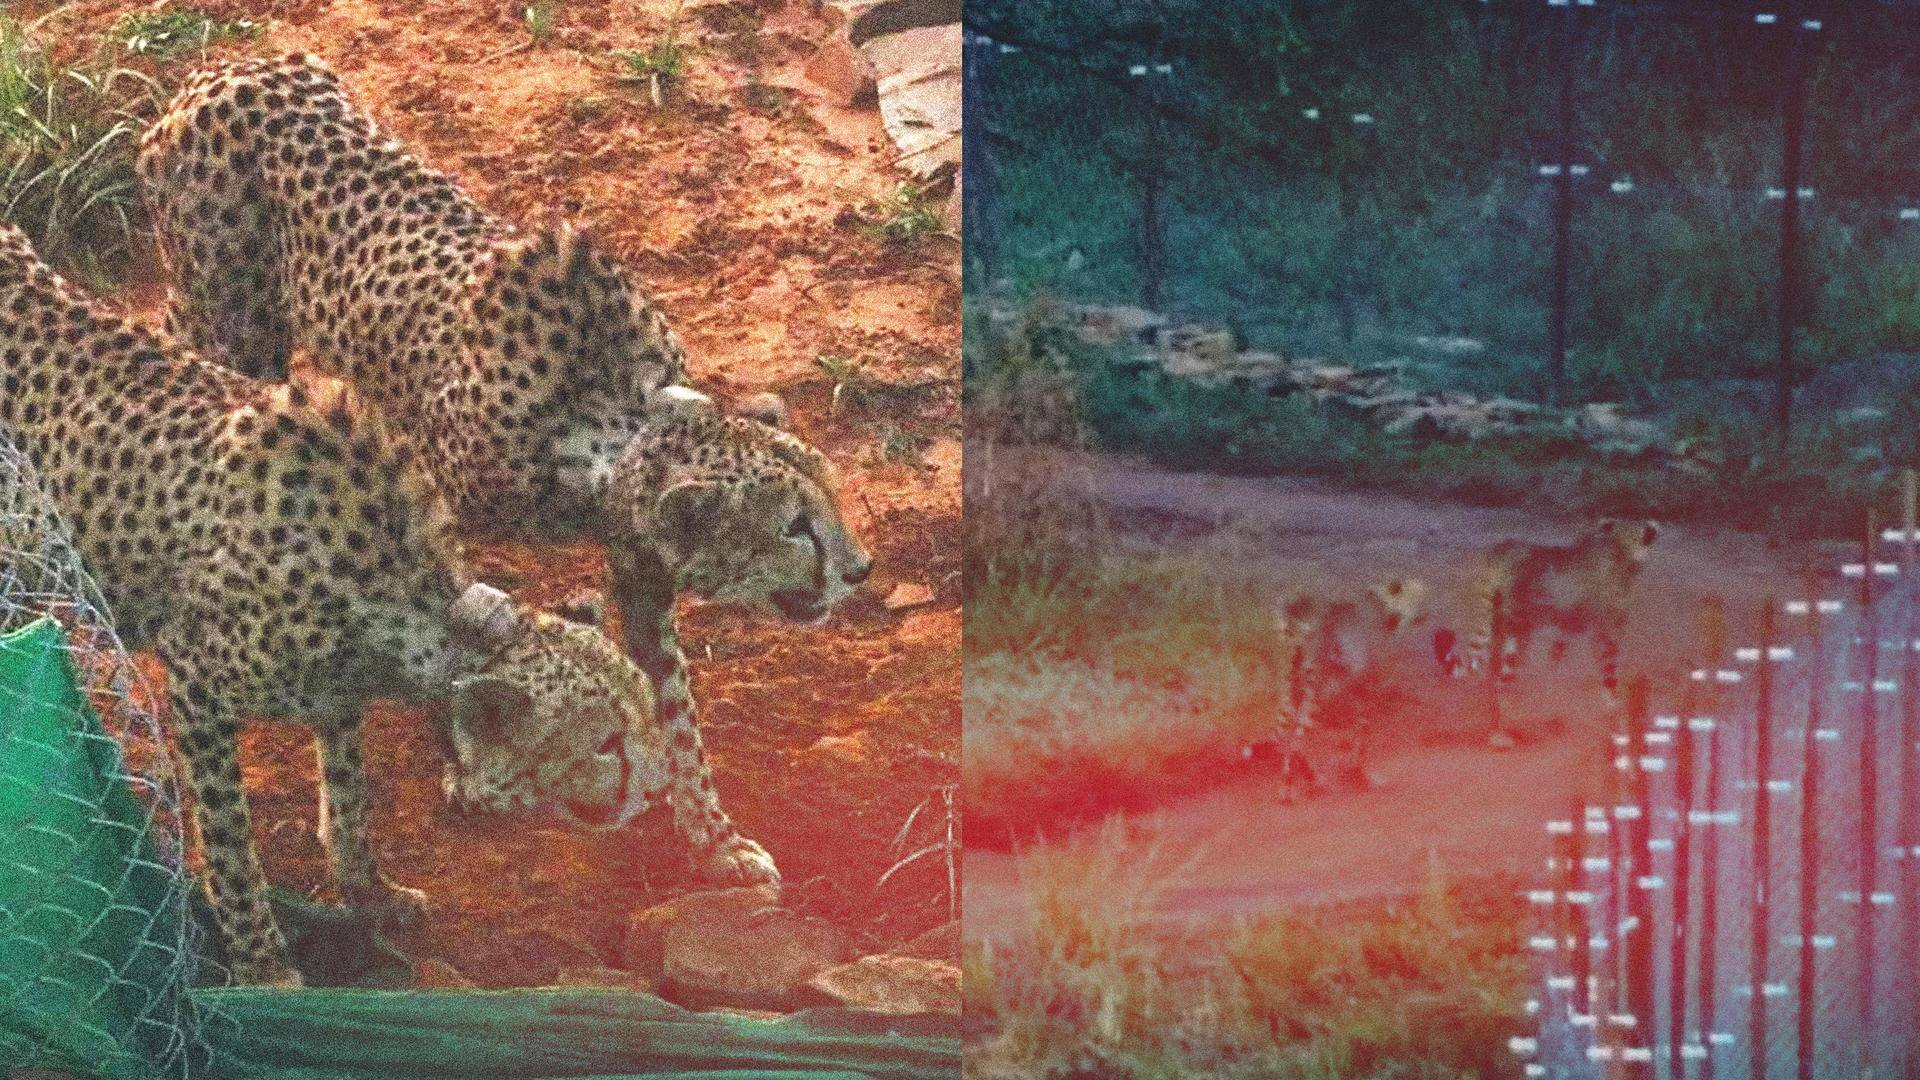 After release from quarantine, 2 Kuno cheetahs make first kill